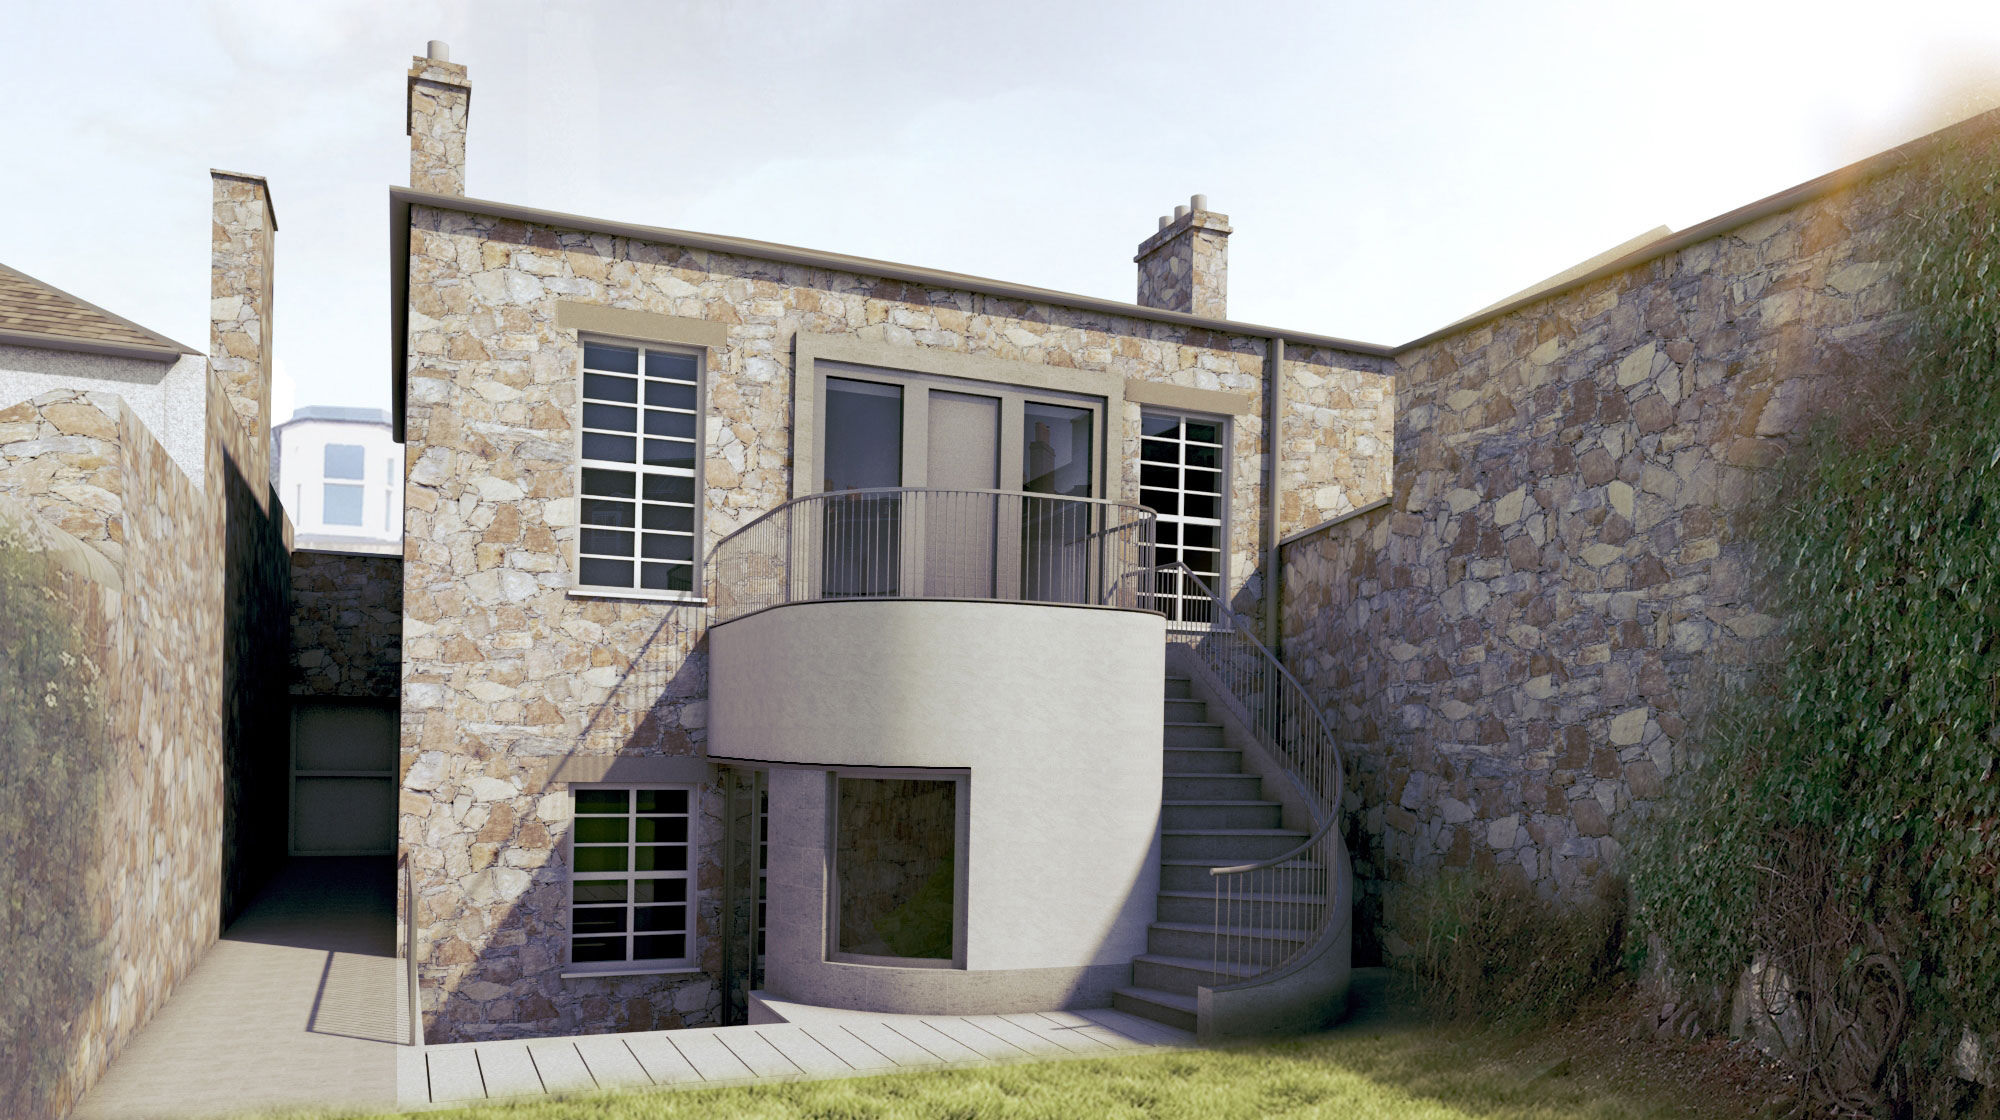 Next stage of the designs for Portobello house extension underway{categories}, {category_name}{/categories}